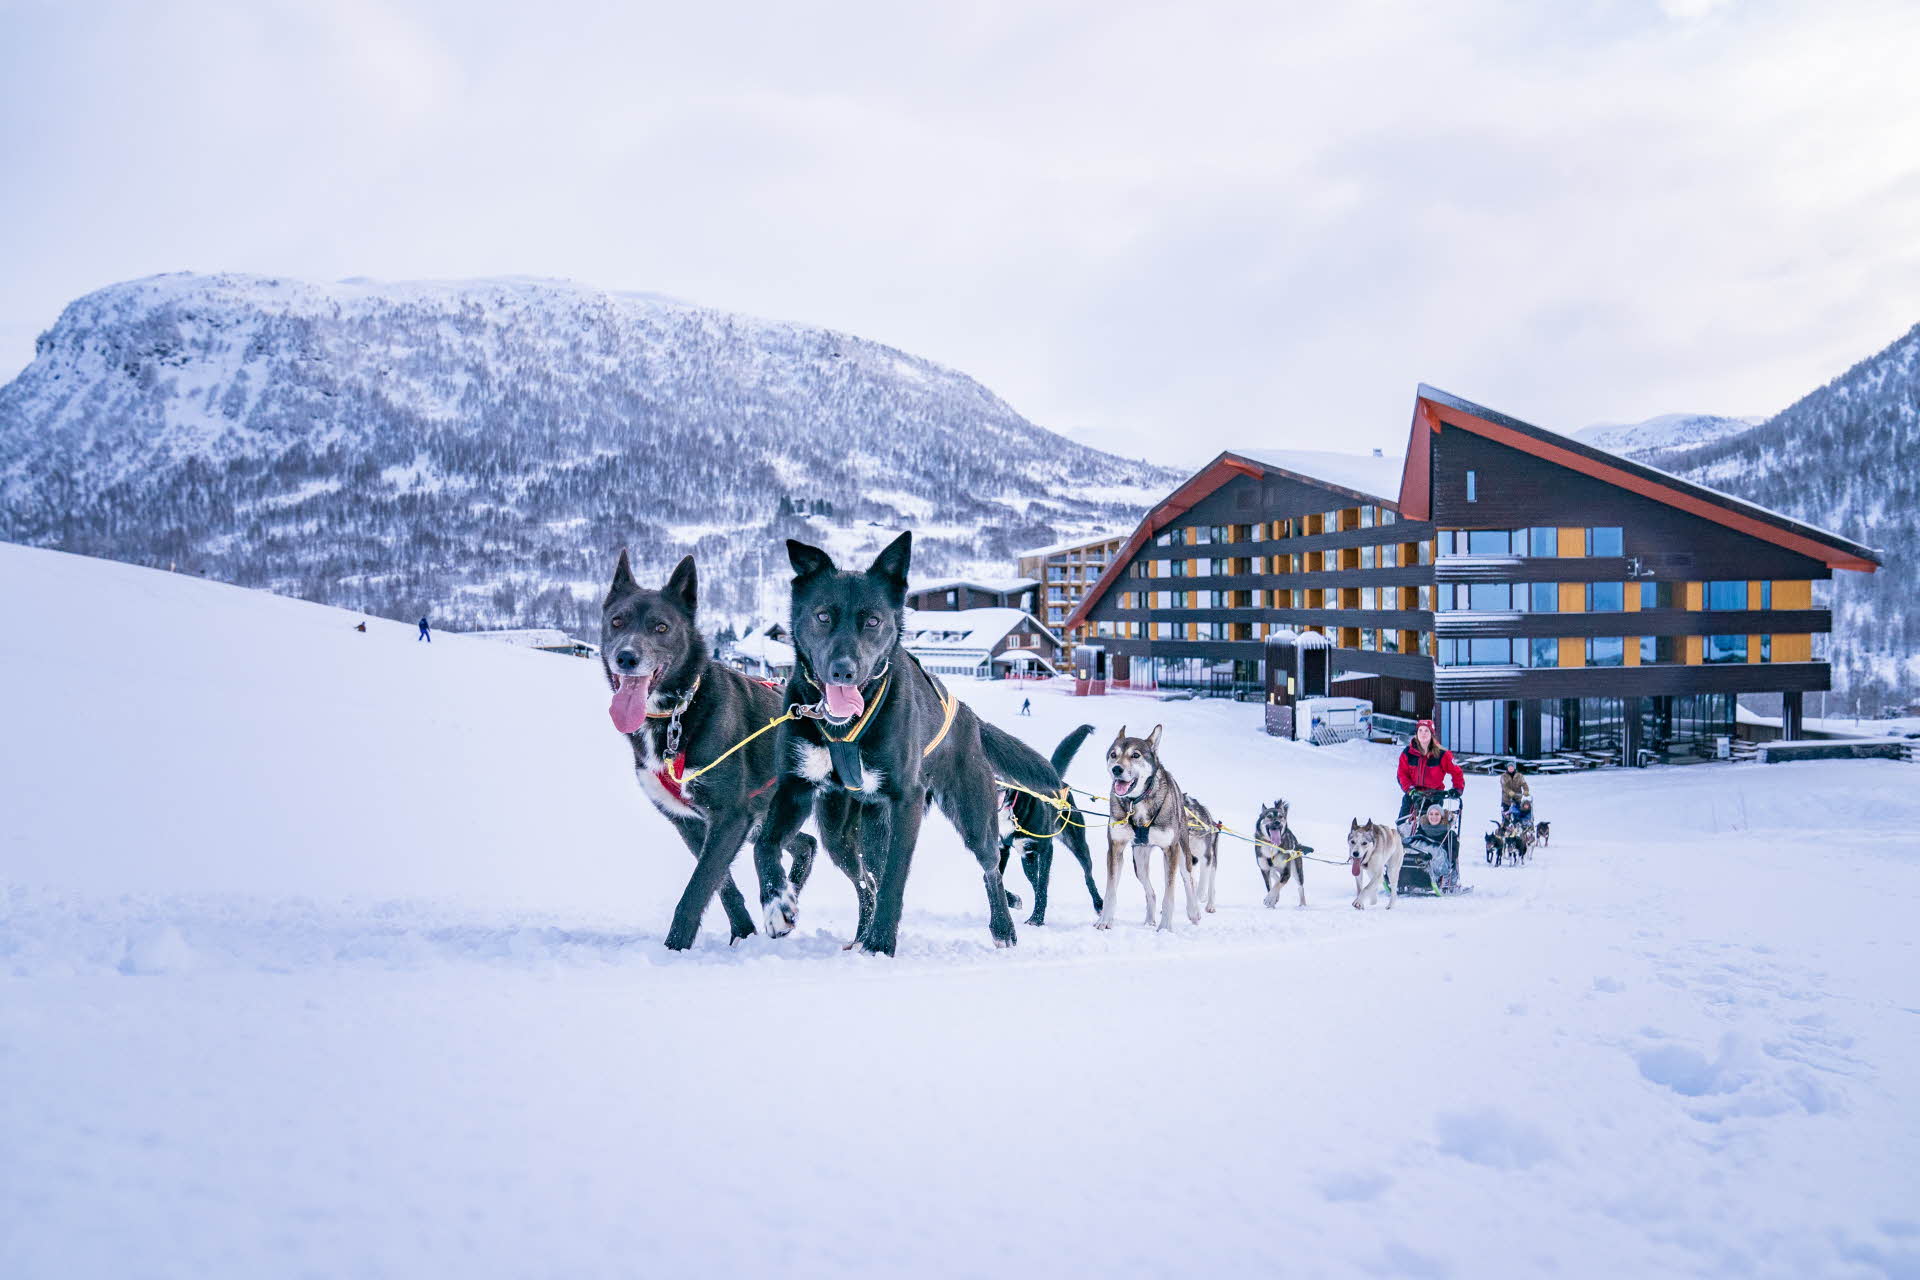 Two packs of huskies pulling sleds up a hill from Myrkdalen Hotel.